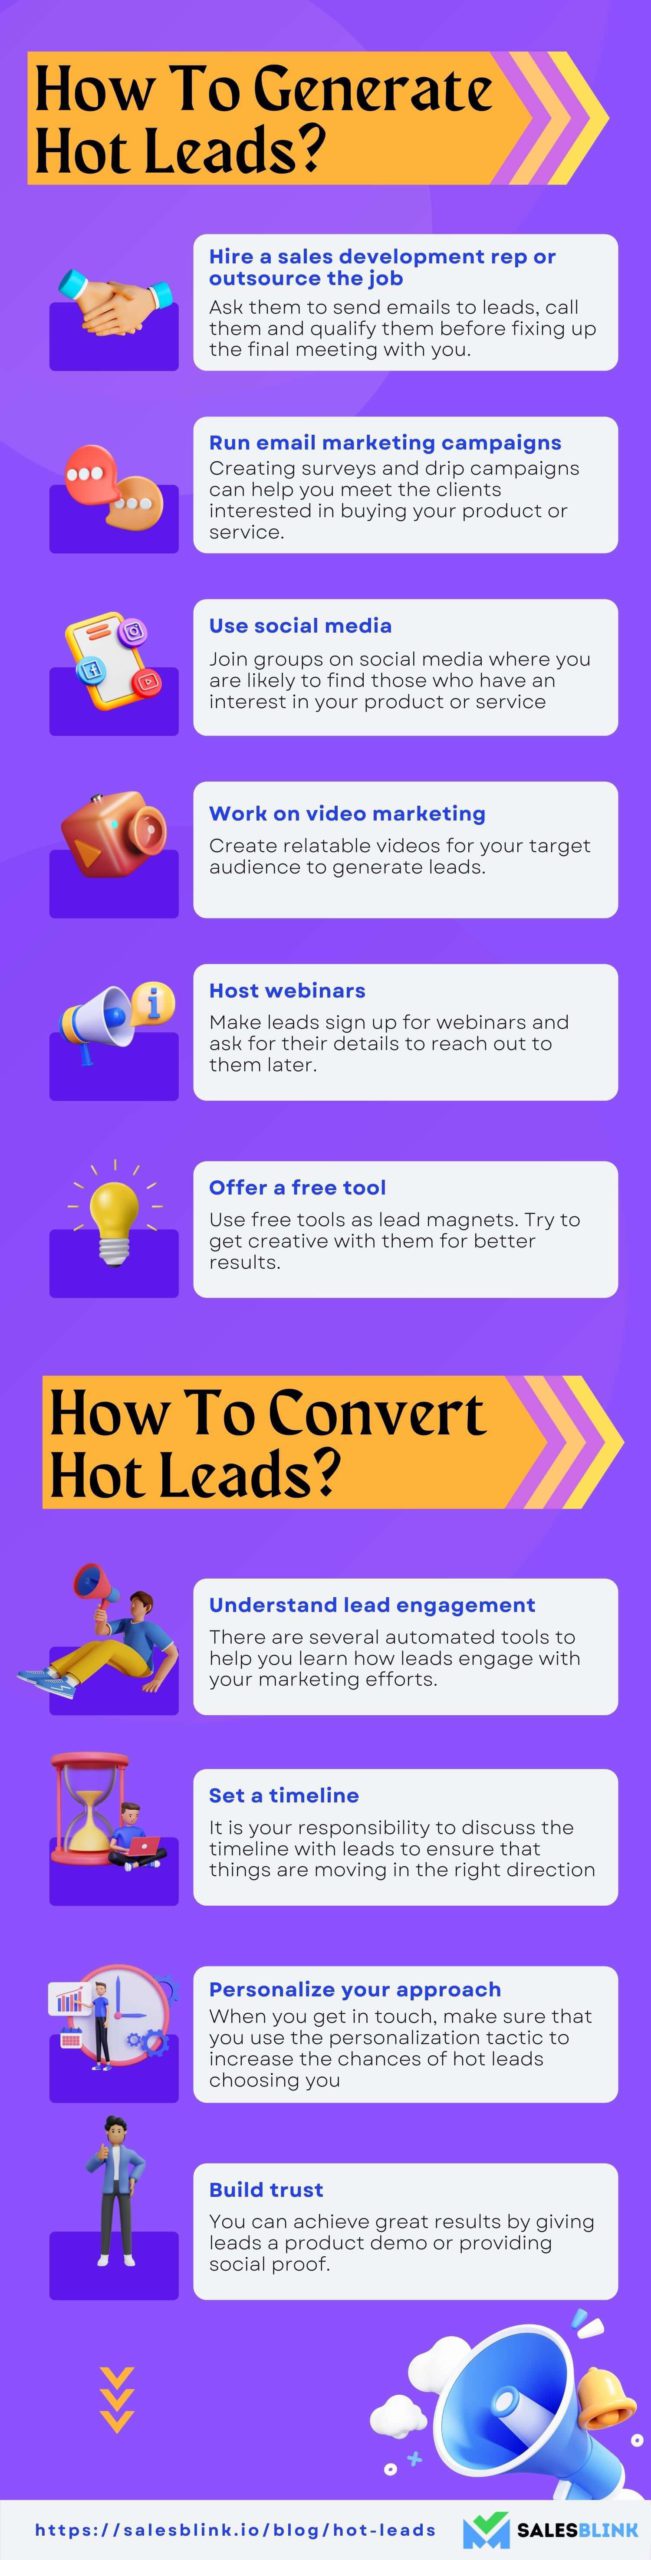 How generate and convert hot leads?